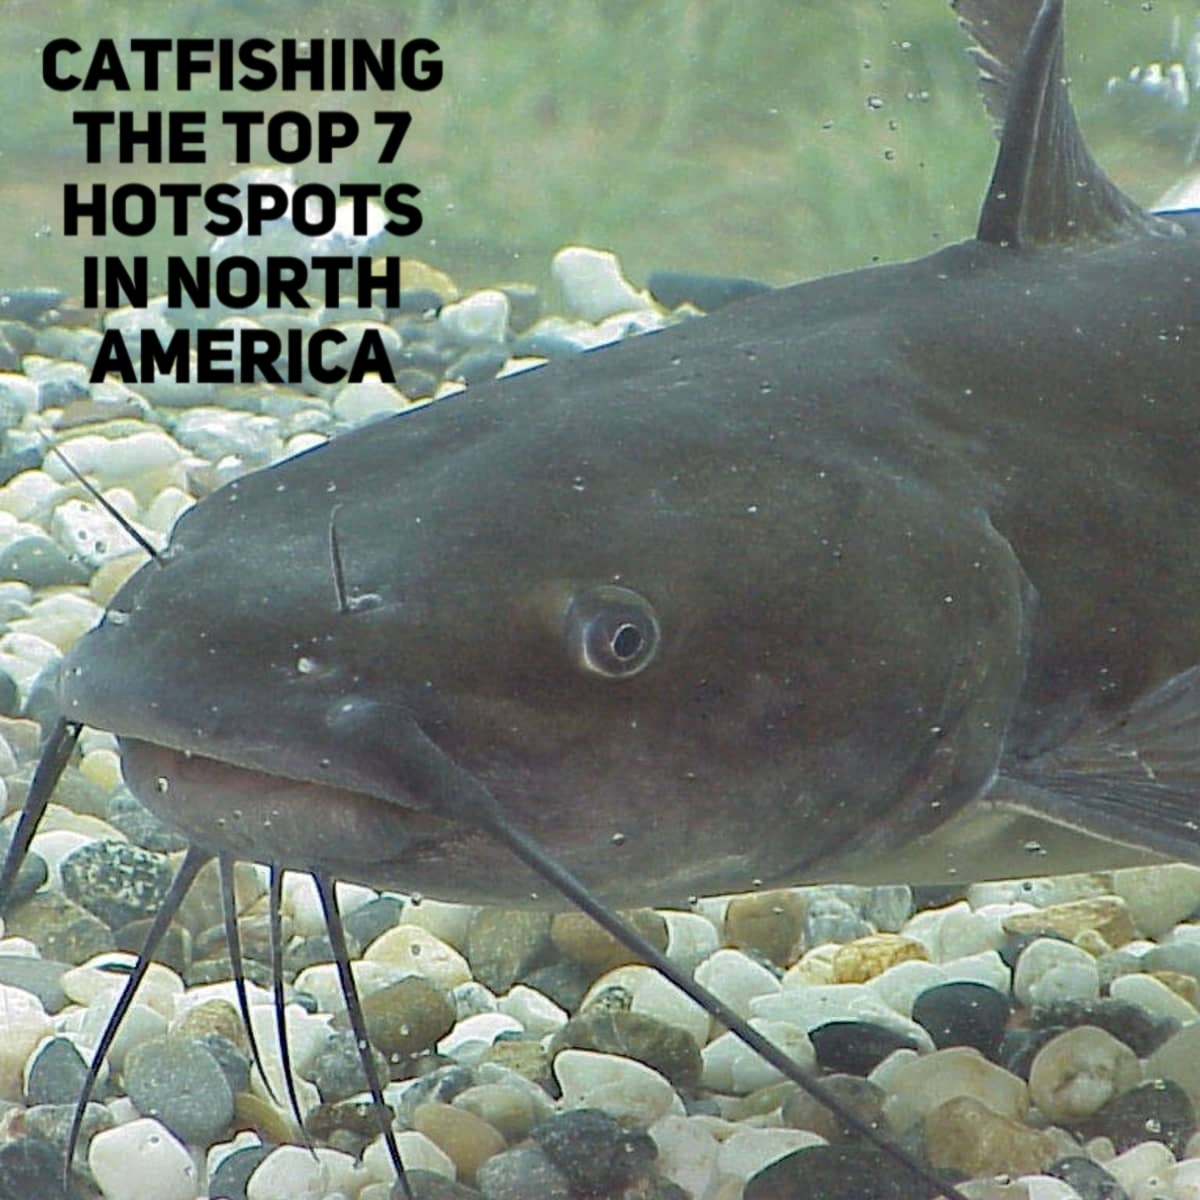 Catfishing the Top 7 Hotspots in North America